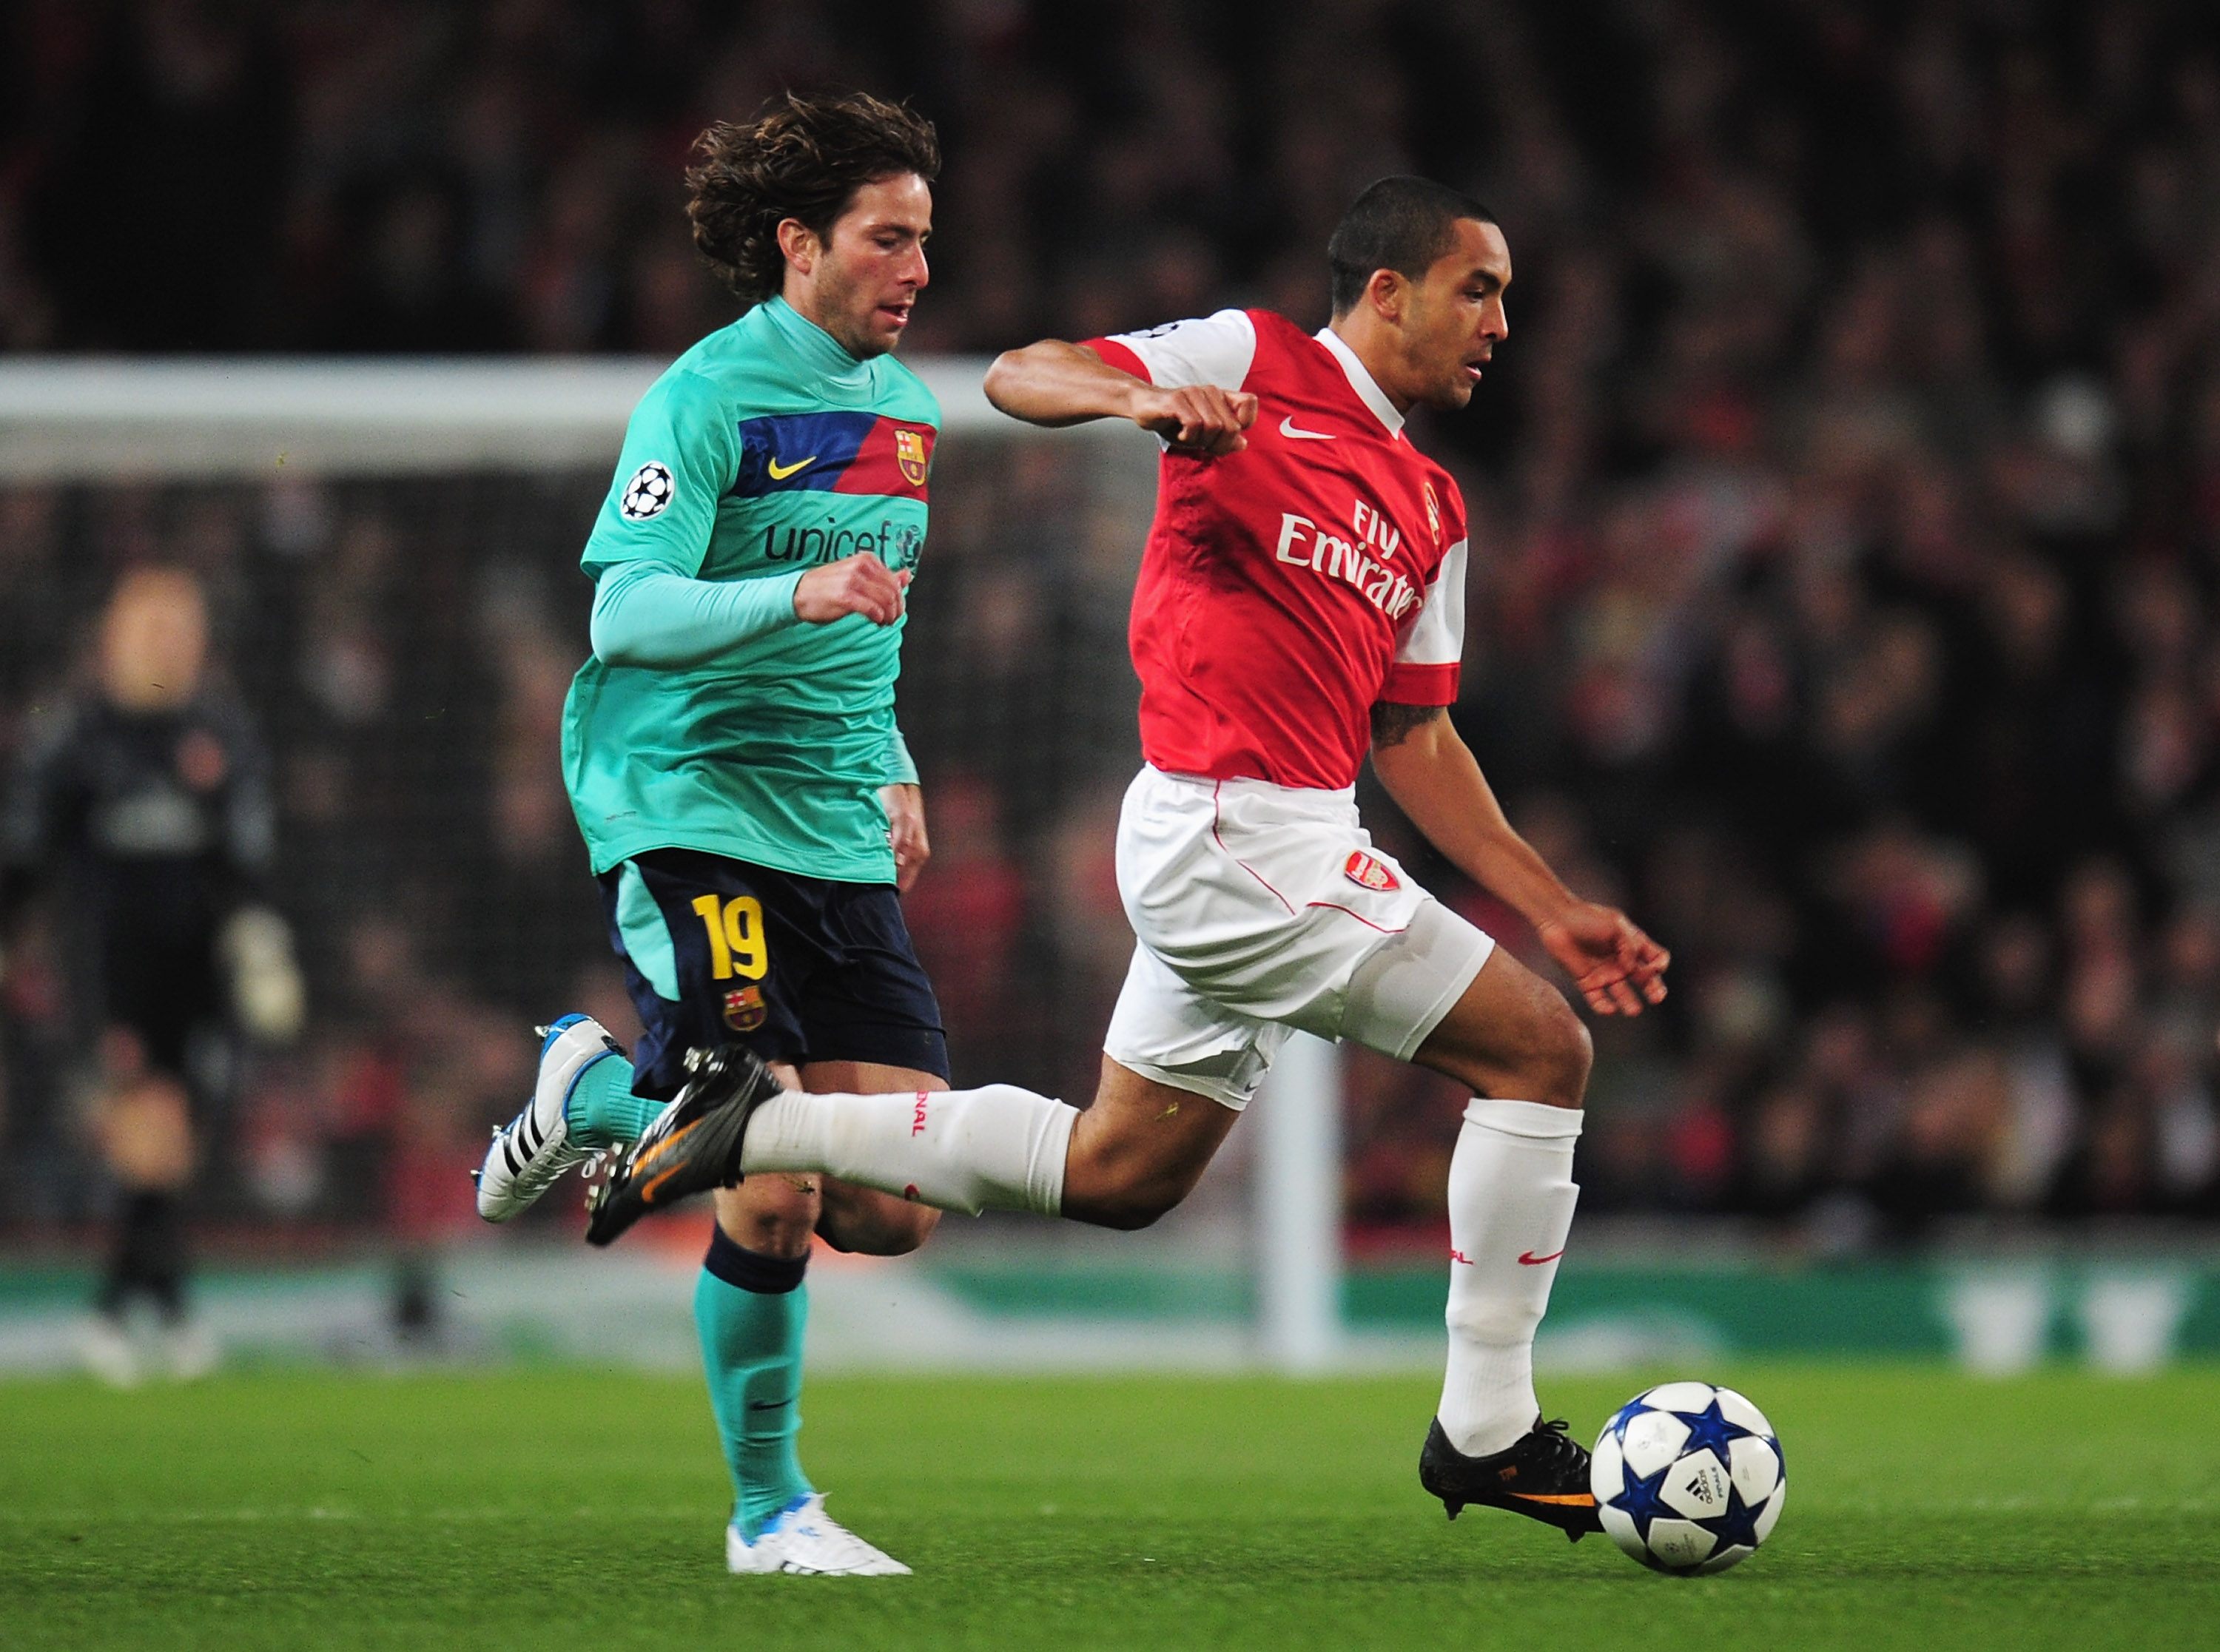 LONDON, ENGLAND - FEBRUARY 16: Theo Walcott of Arsenal goes past Maxwell of Barcelona during the UEFA Champions League round of 16 first leg match between Arsenal and Barcelona at the Emirates Stadium on February 16, 2011 in London, England.  (Photo by Sh